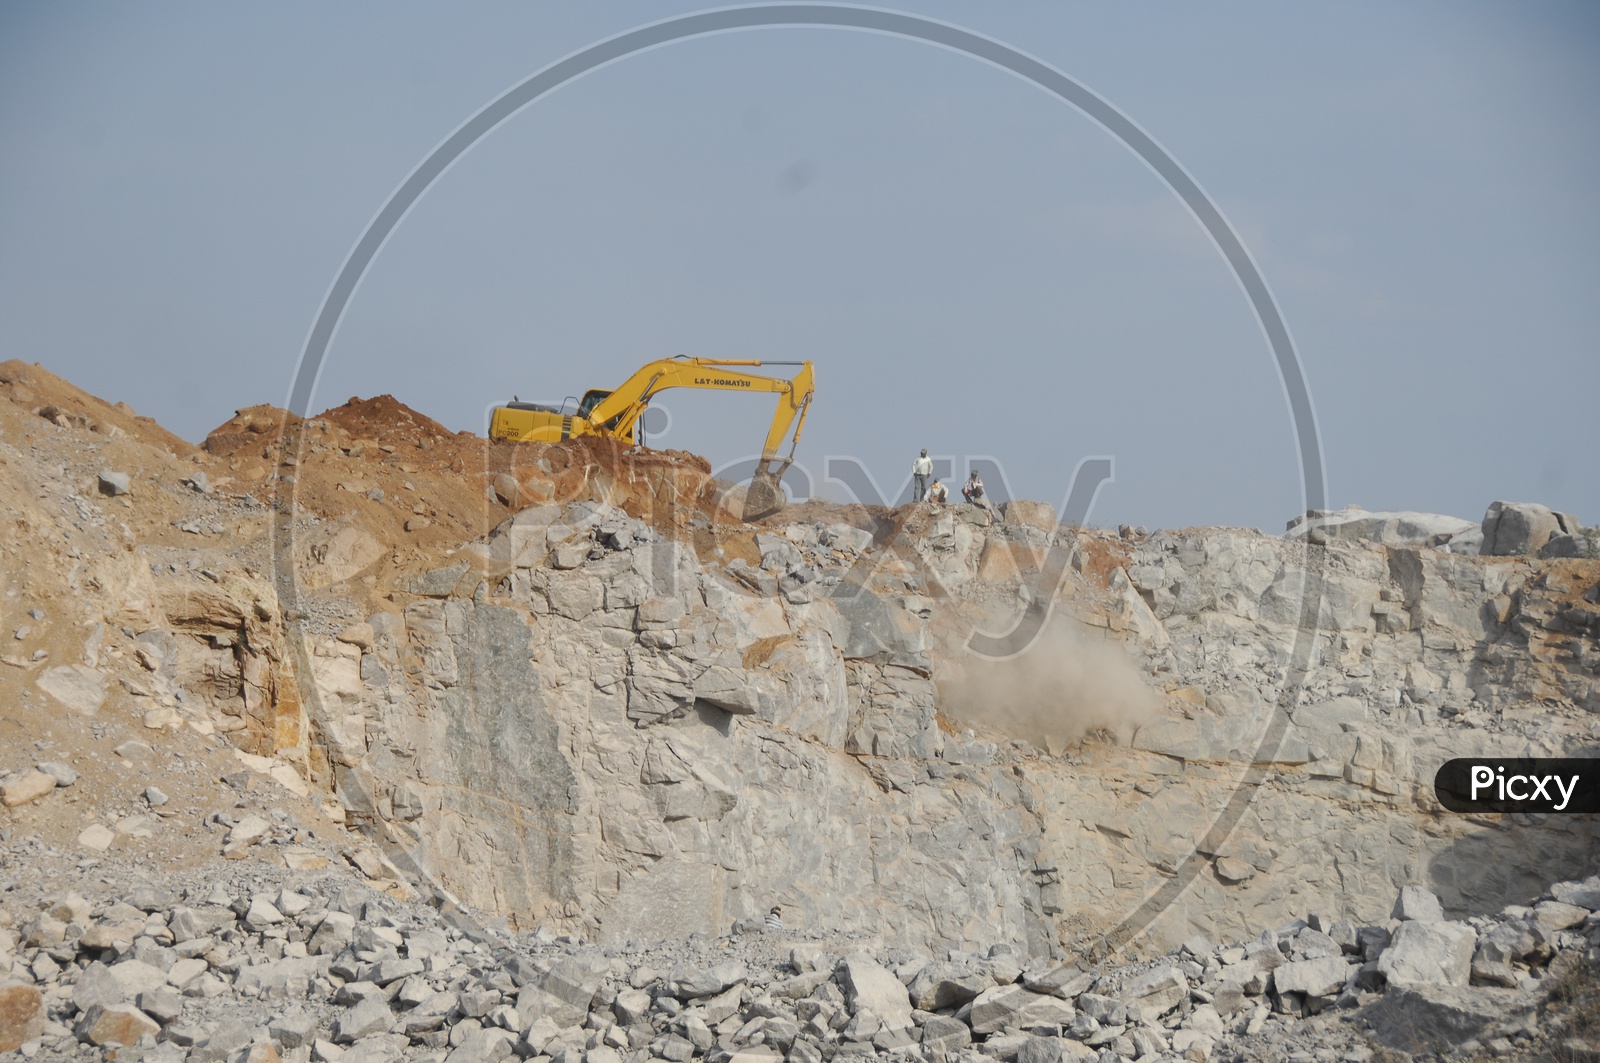 Bulldozer quarrying the construction area of rocky hill alongside the workers